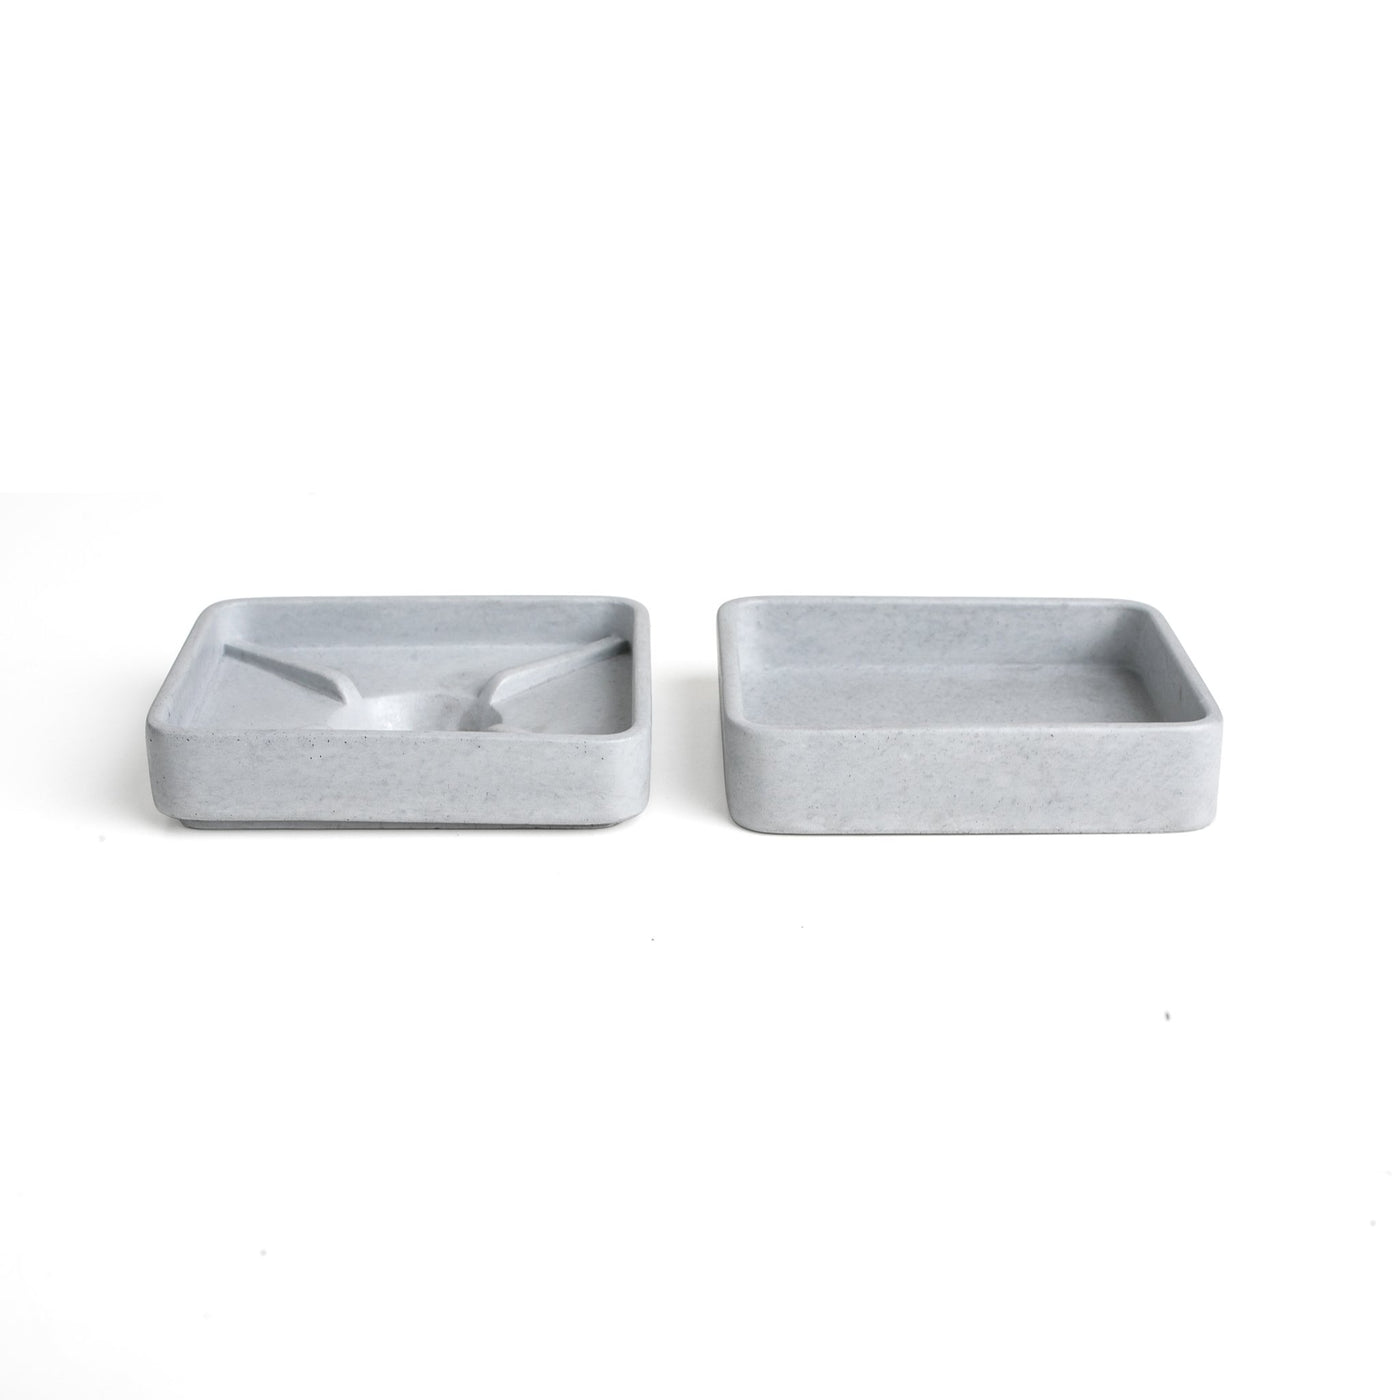 Grey Concrete Soap Stand w/ Vegan Soap-Storing and Organising-CONCRETE, SOAP STANDS-Forest Homes-Nature inspired decor-Nature decor